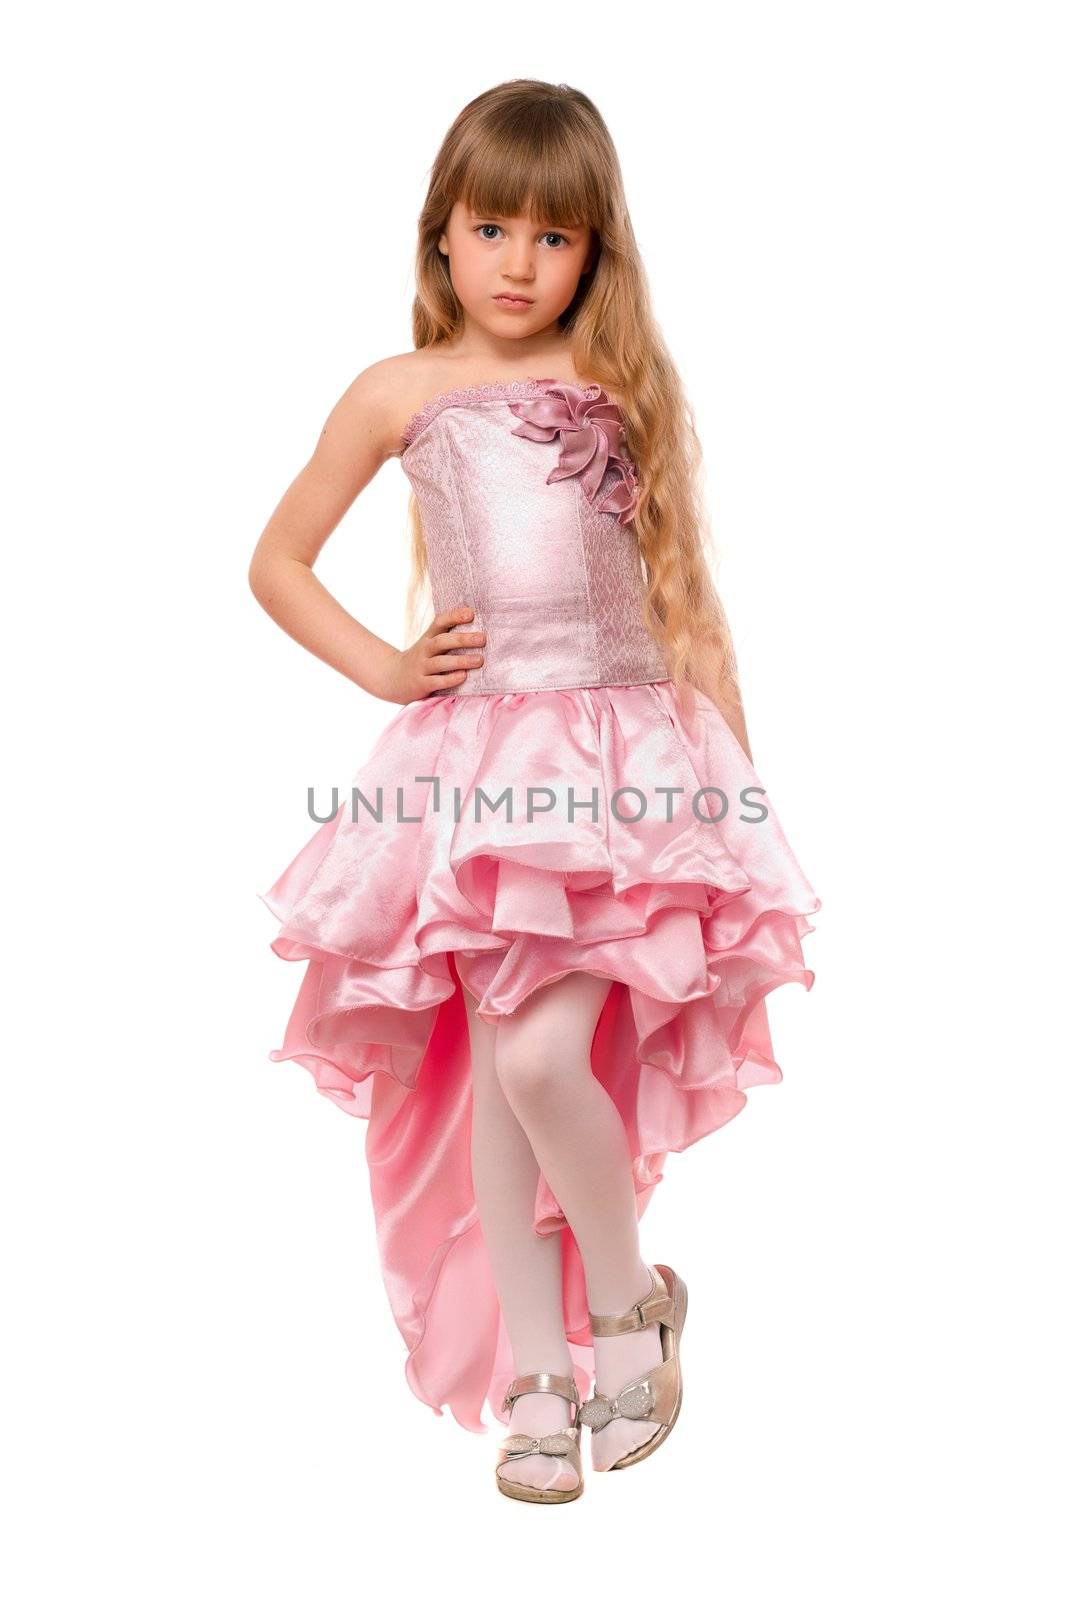 Pretty little girl in a chic pink dress. Isolated